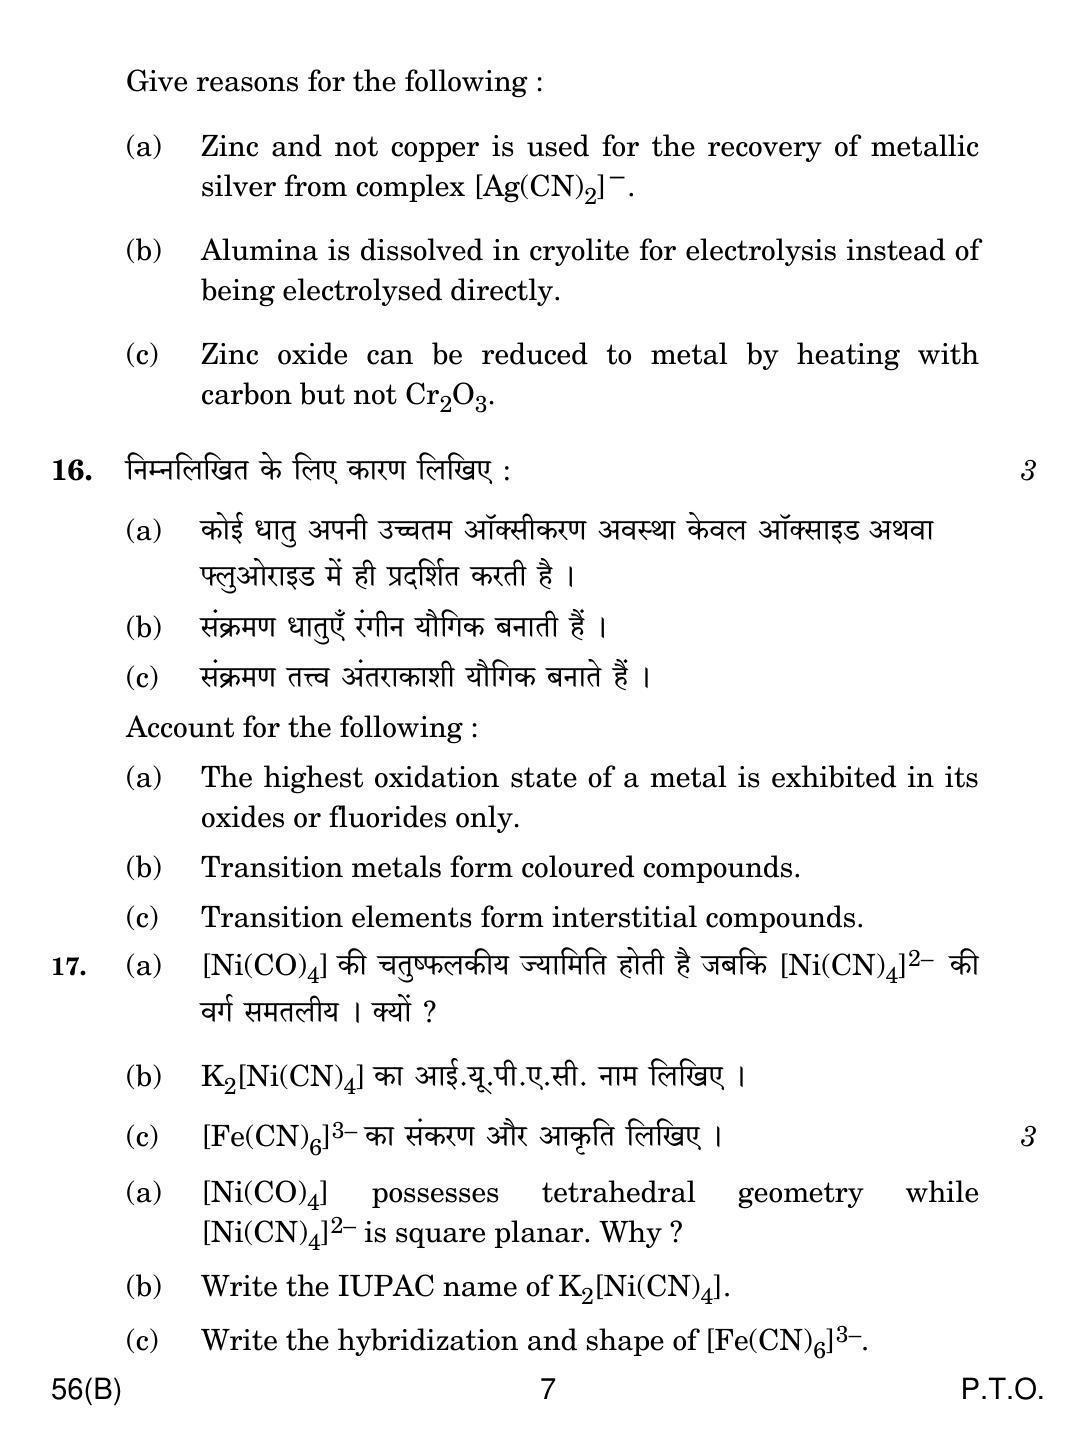 CBSE Class 12 56(B) CHEMISTRY FOR BLIND CANDIDATES 2018 Question Paper - Page 7